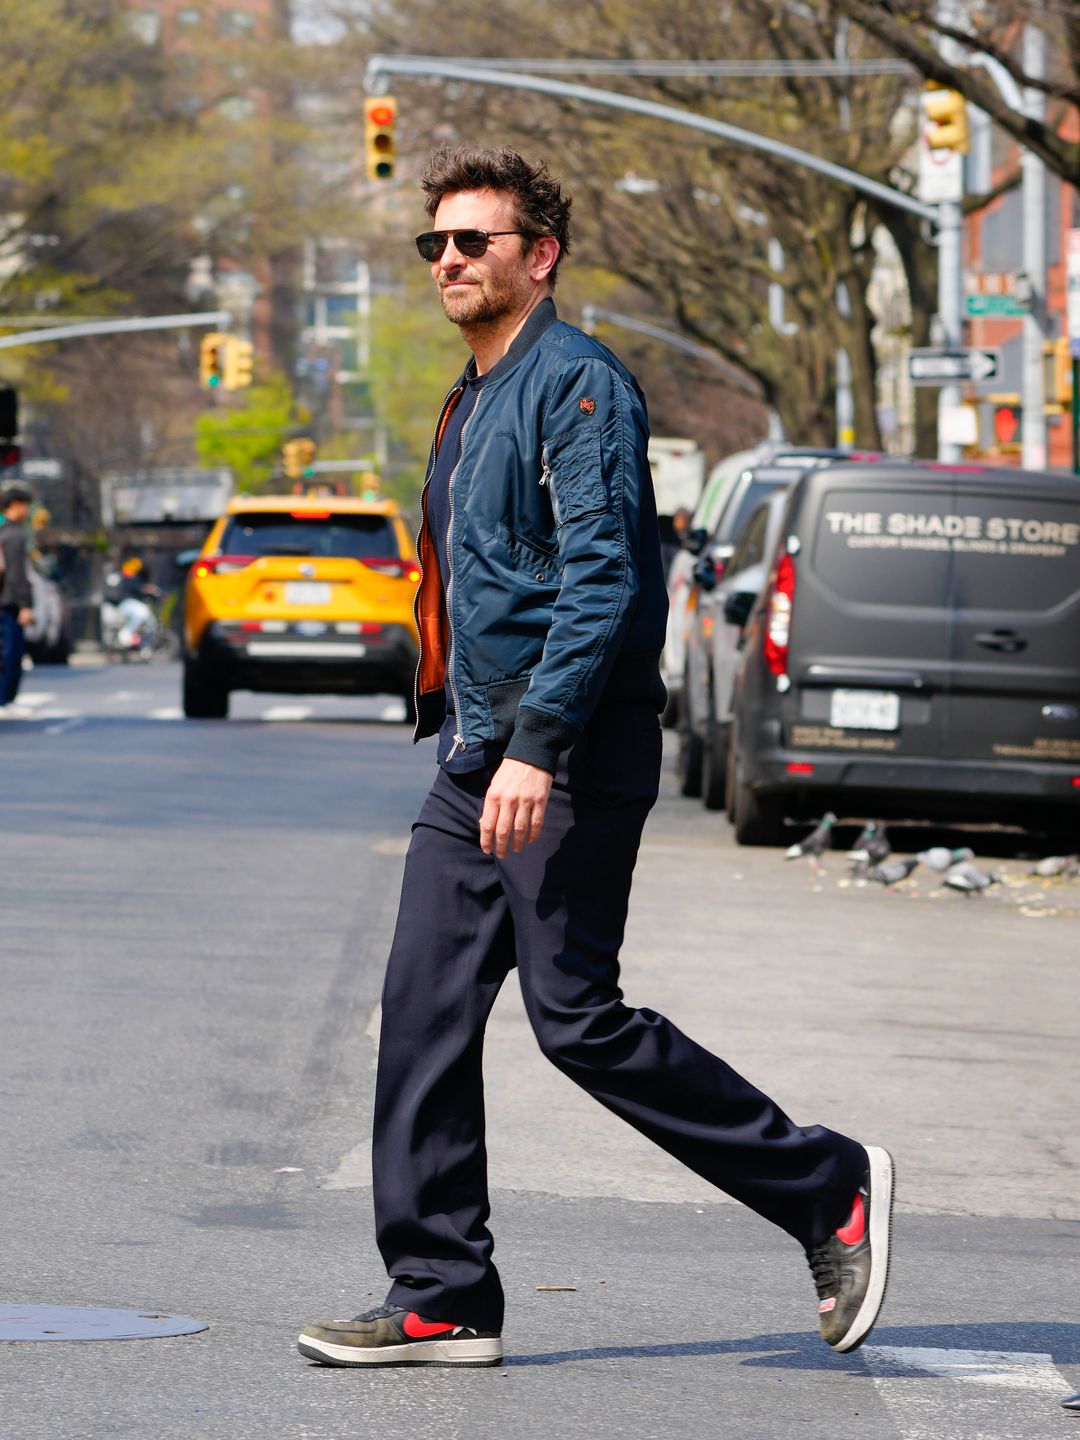 Bradley Cooper is spotted out and about in New York City